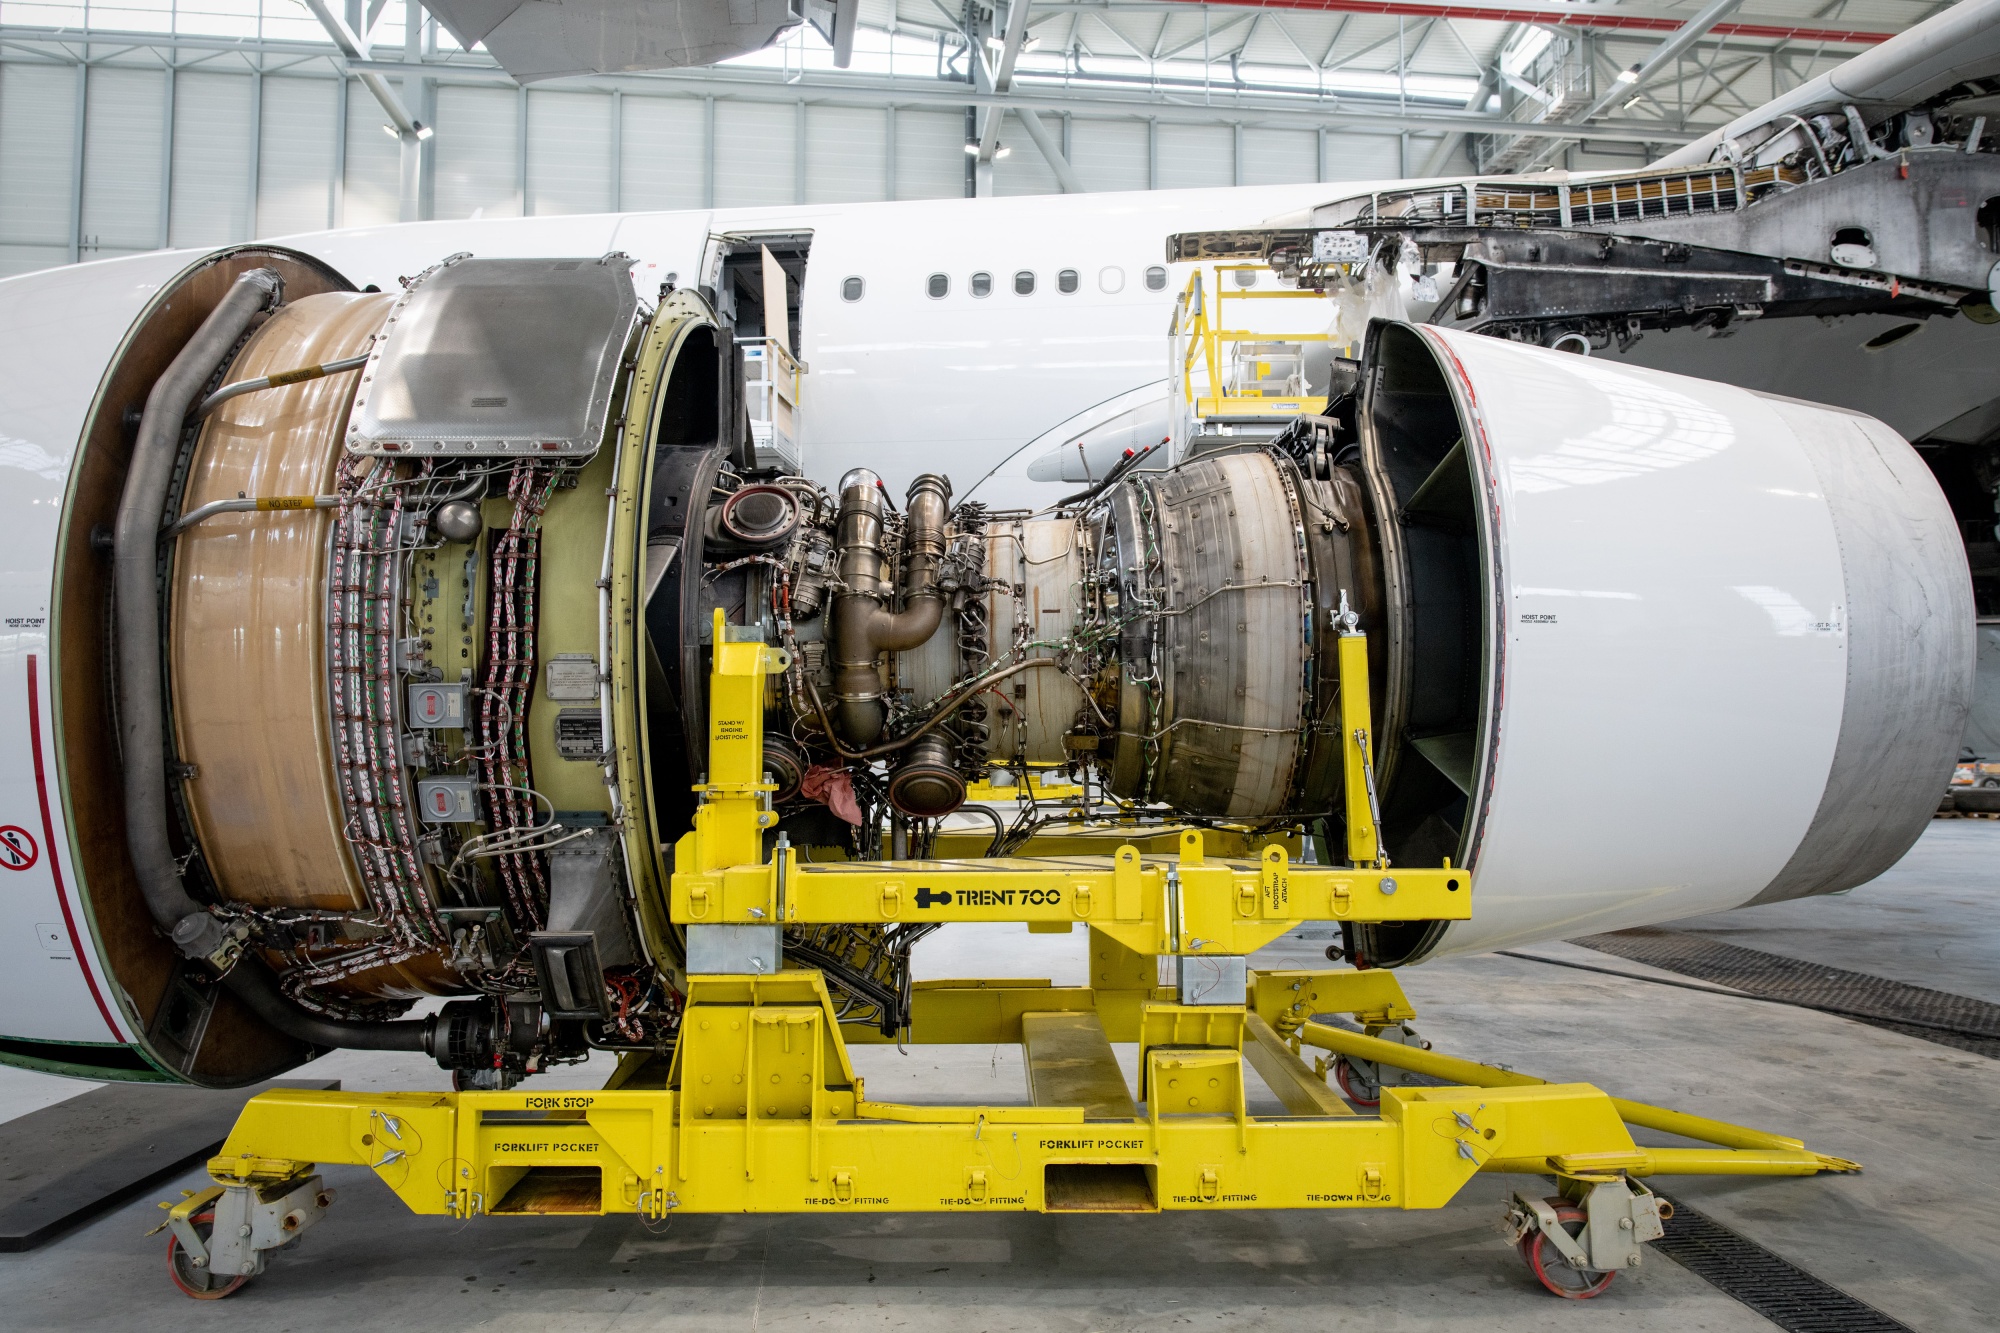 Airbus, Boeing Jet Engine Shortage Forces Airlines to Ground